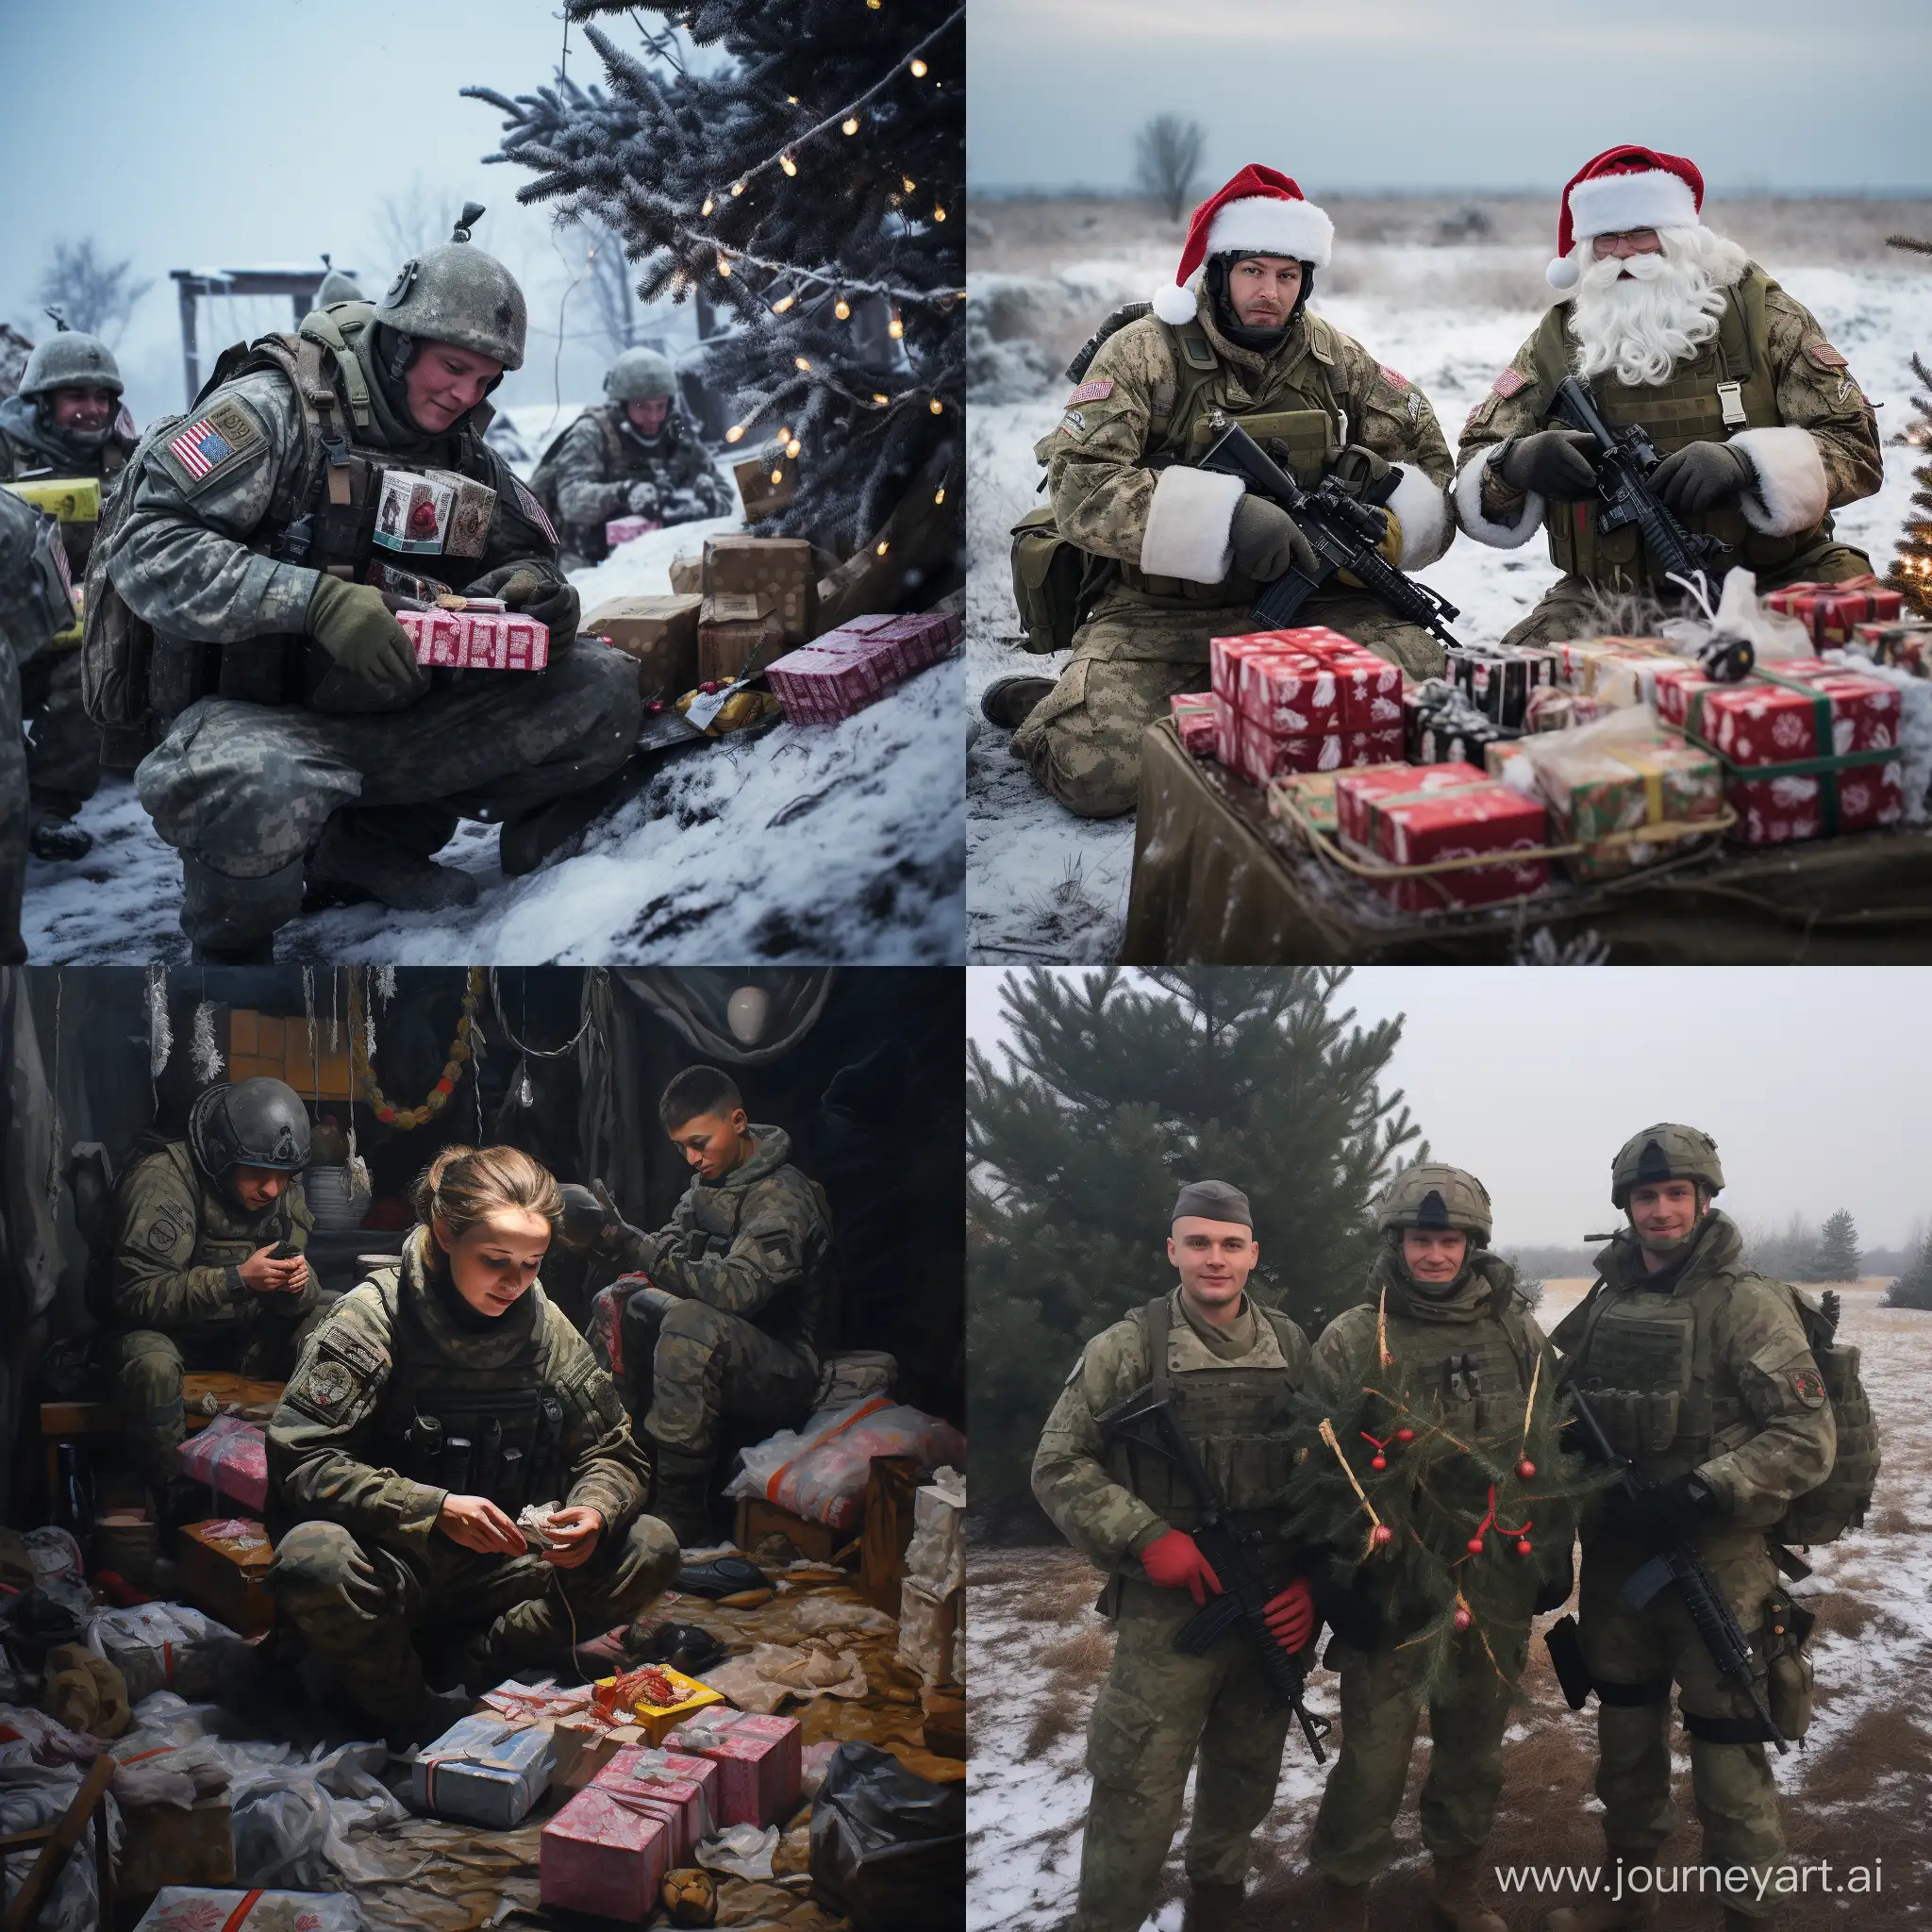 Ukrainian soldiers celebrating Christmas and New Year on the front lines of war with russia